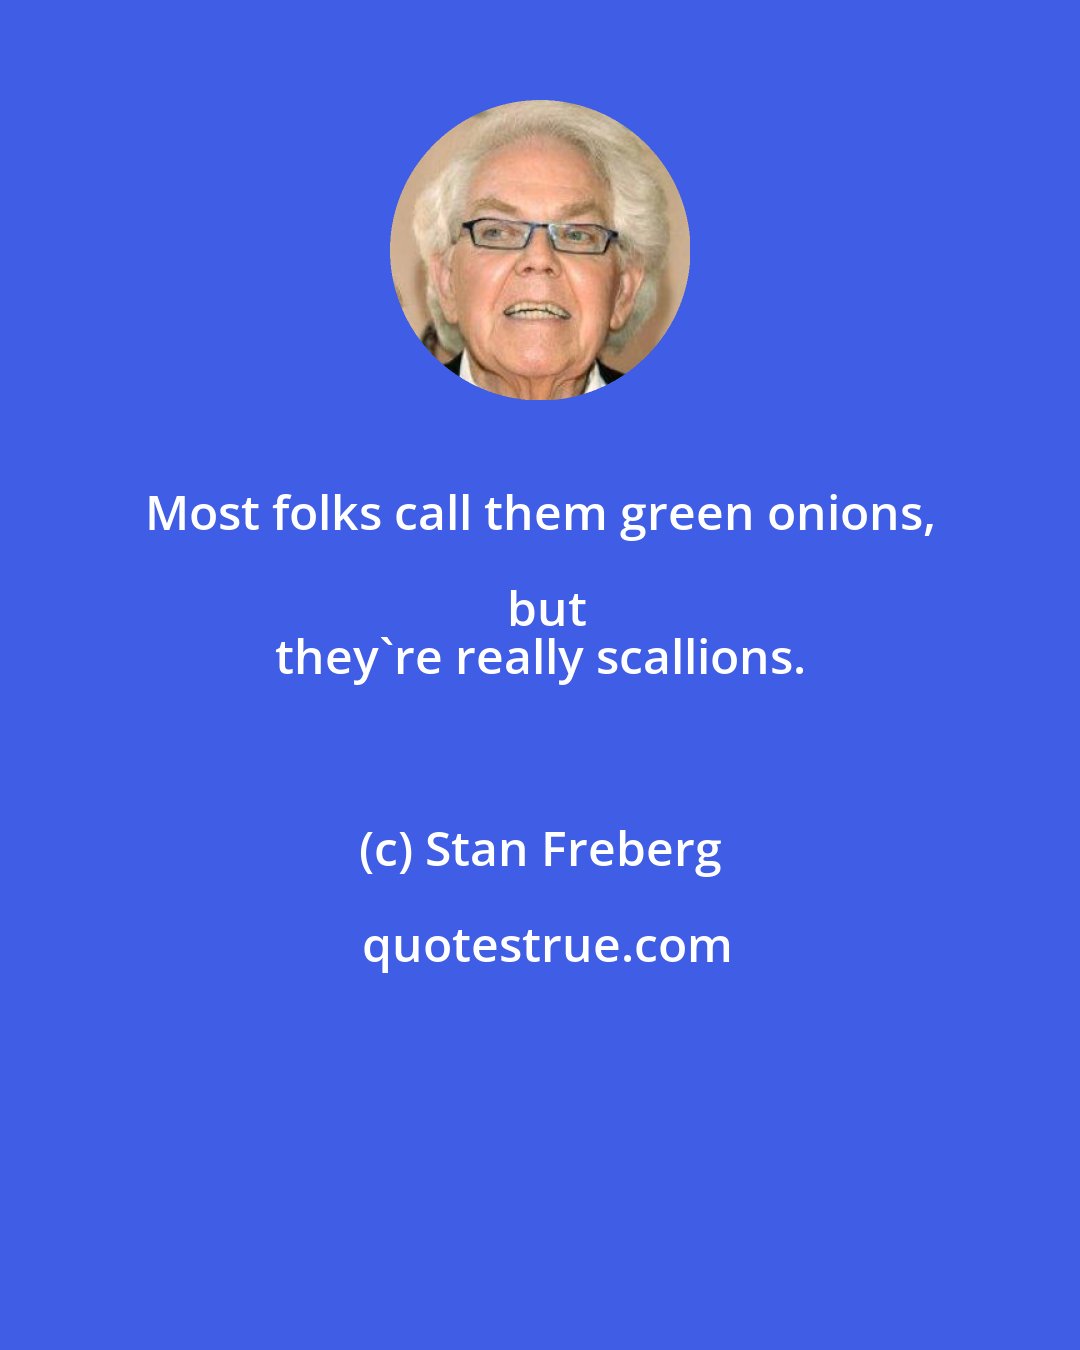 Stan Freberg: Most folks call them green onions, but
 they're really scallions.